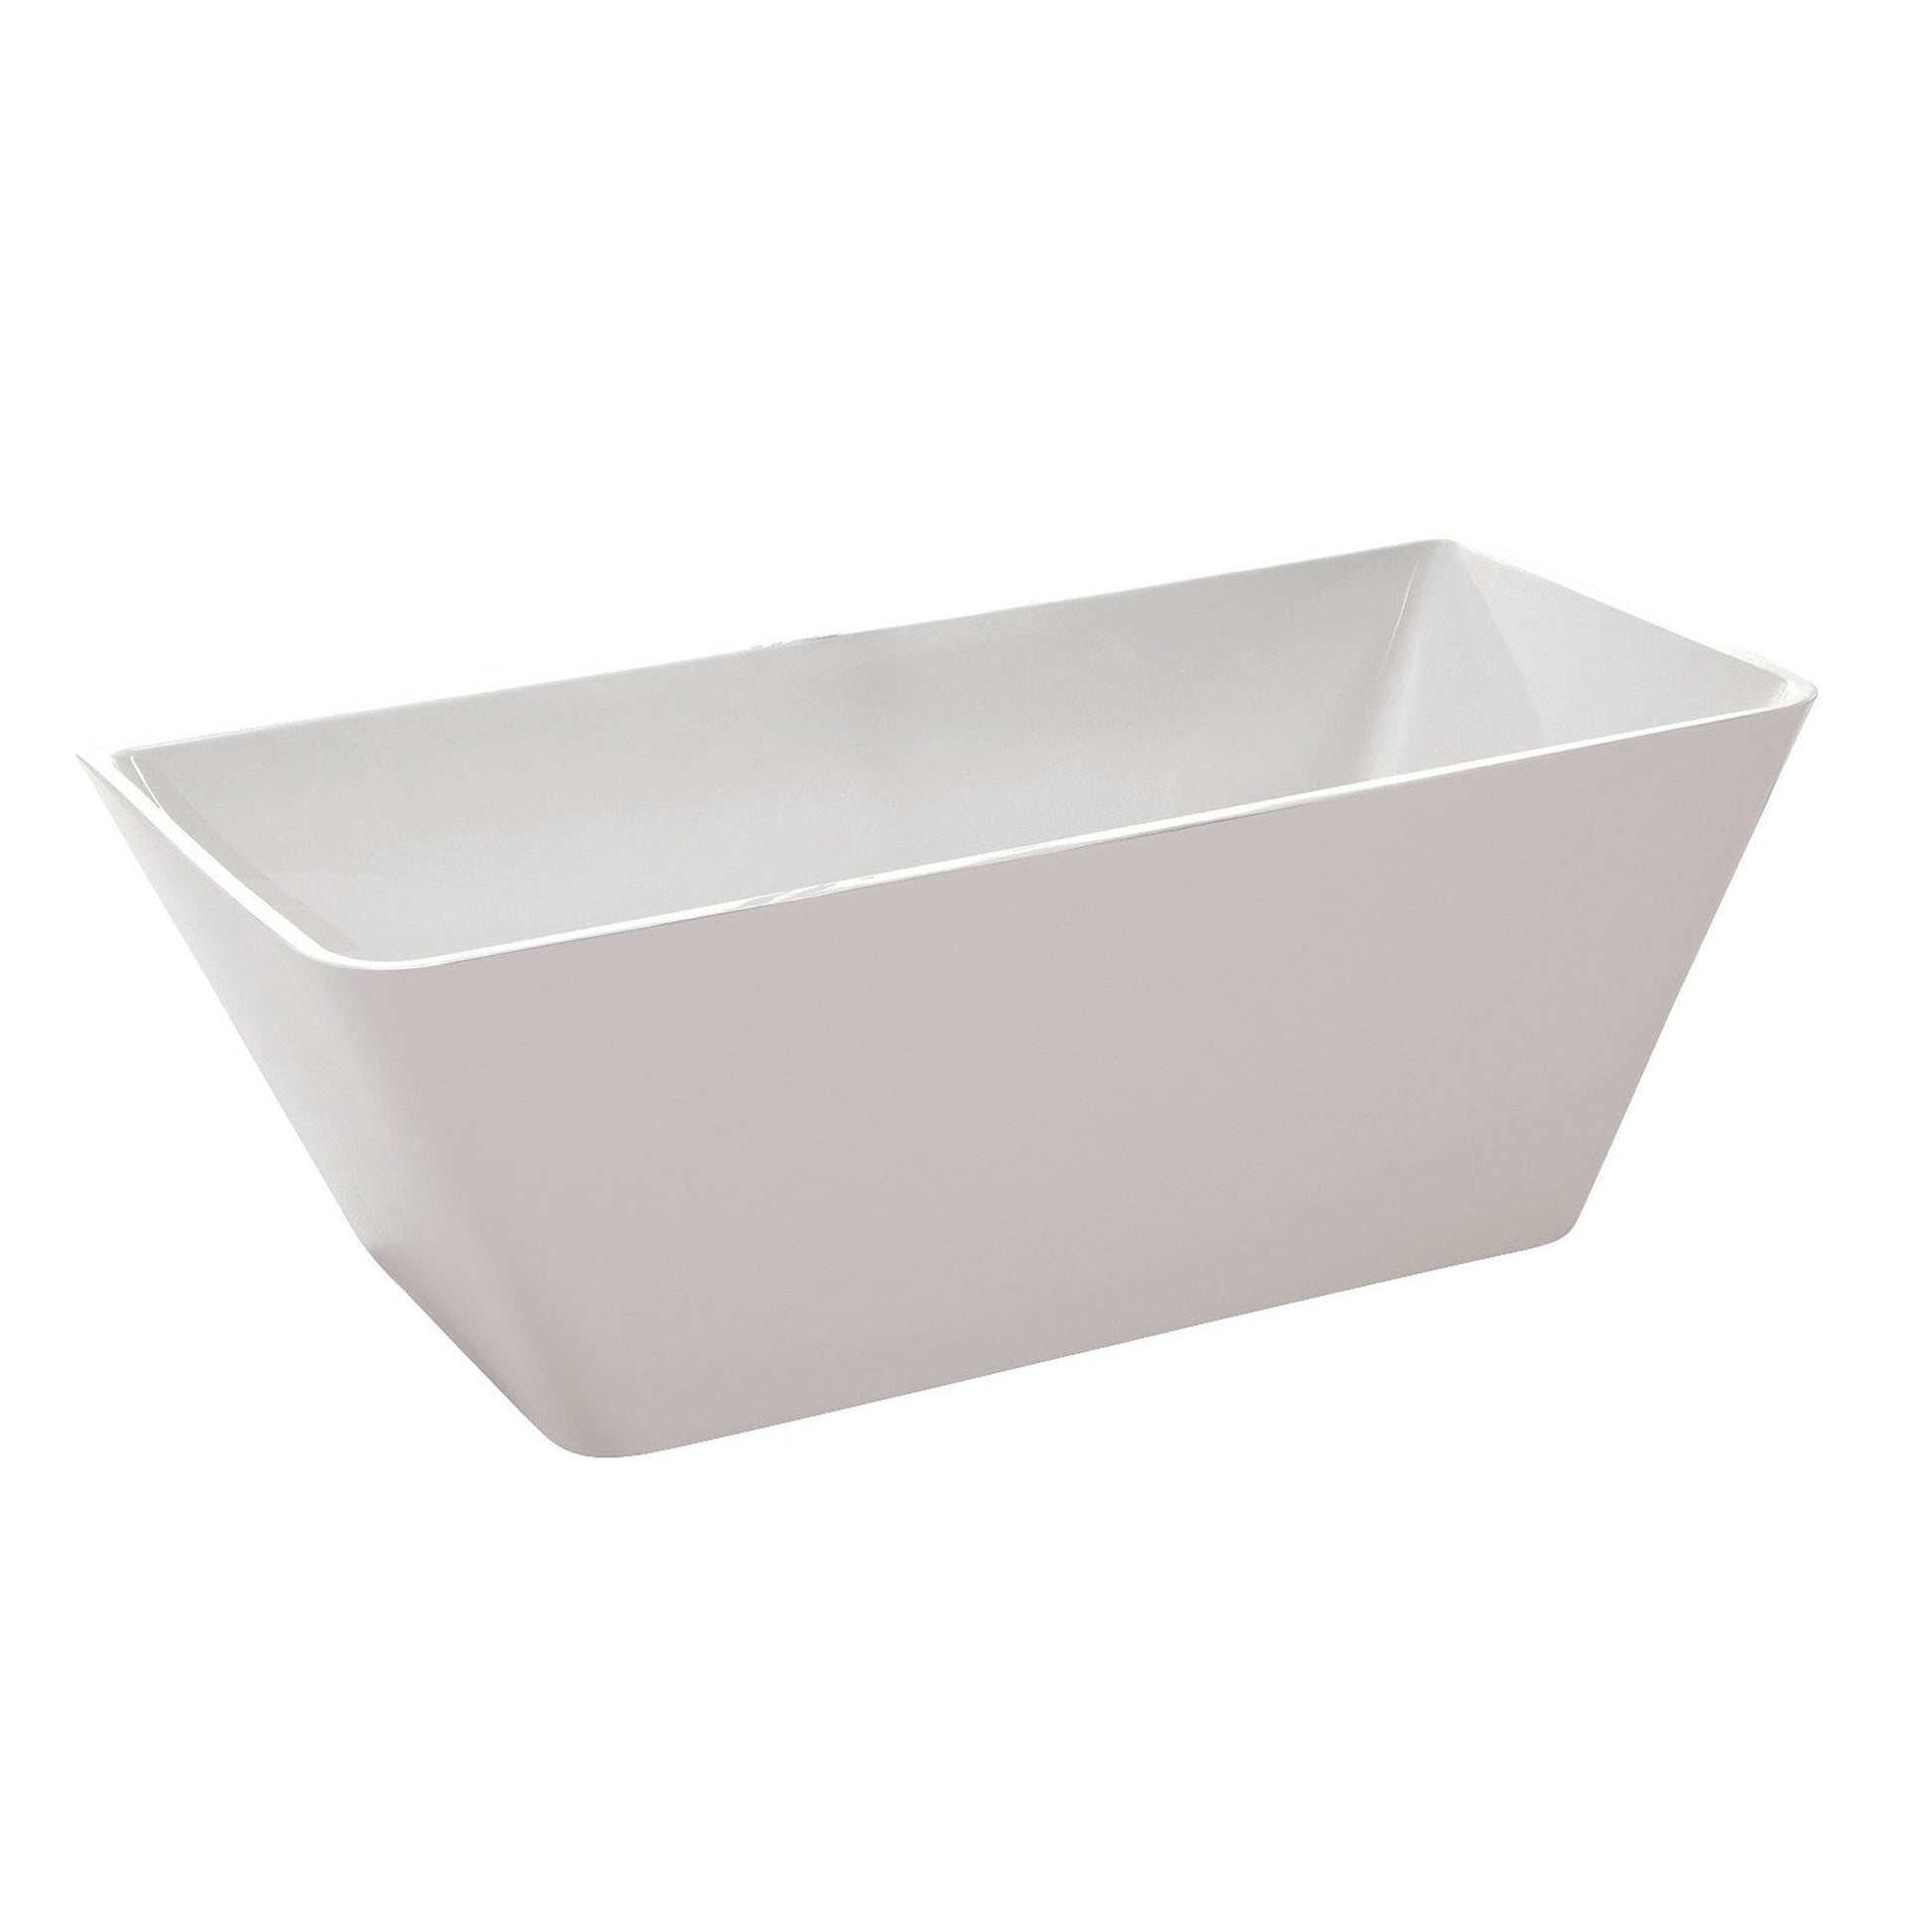 ANZZI Zenith Series 67" x 32" Glossy White Freestanding Bathtub With Built-In Overflow and Pop-Up Drain